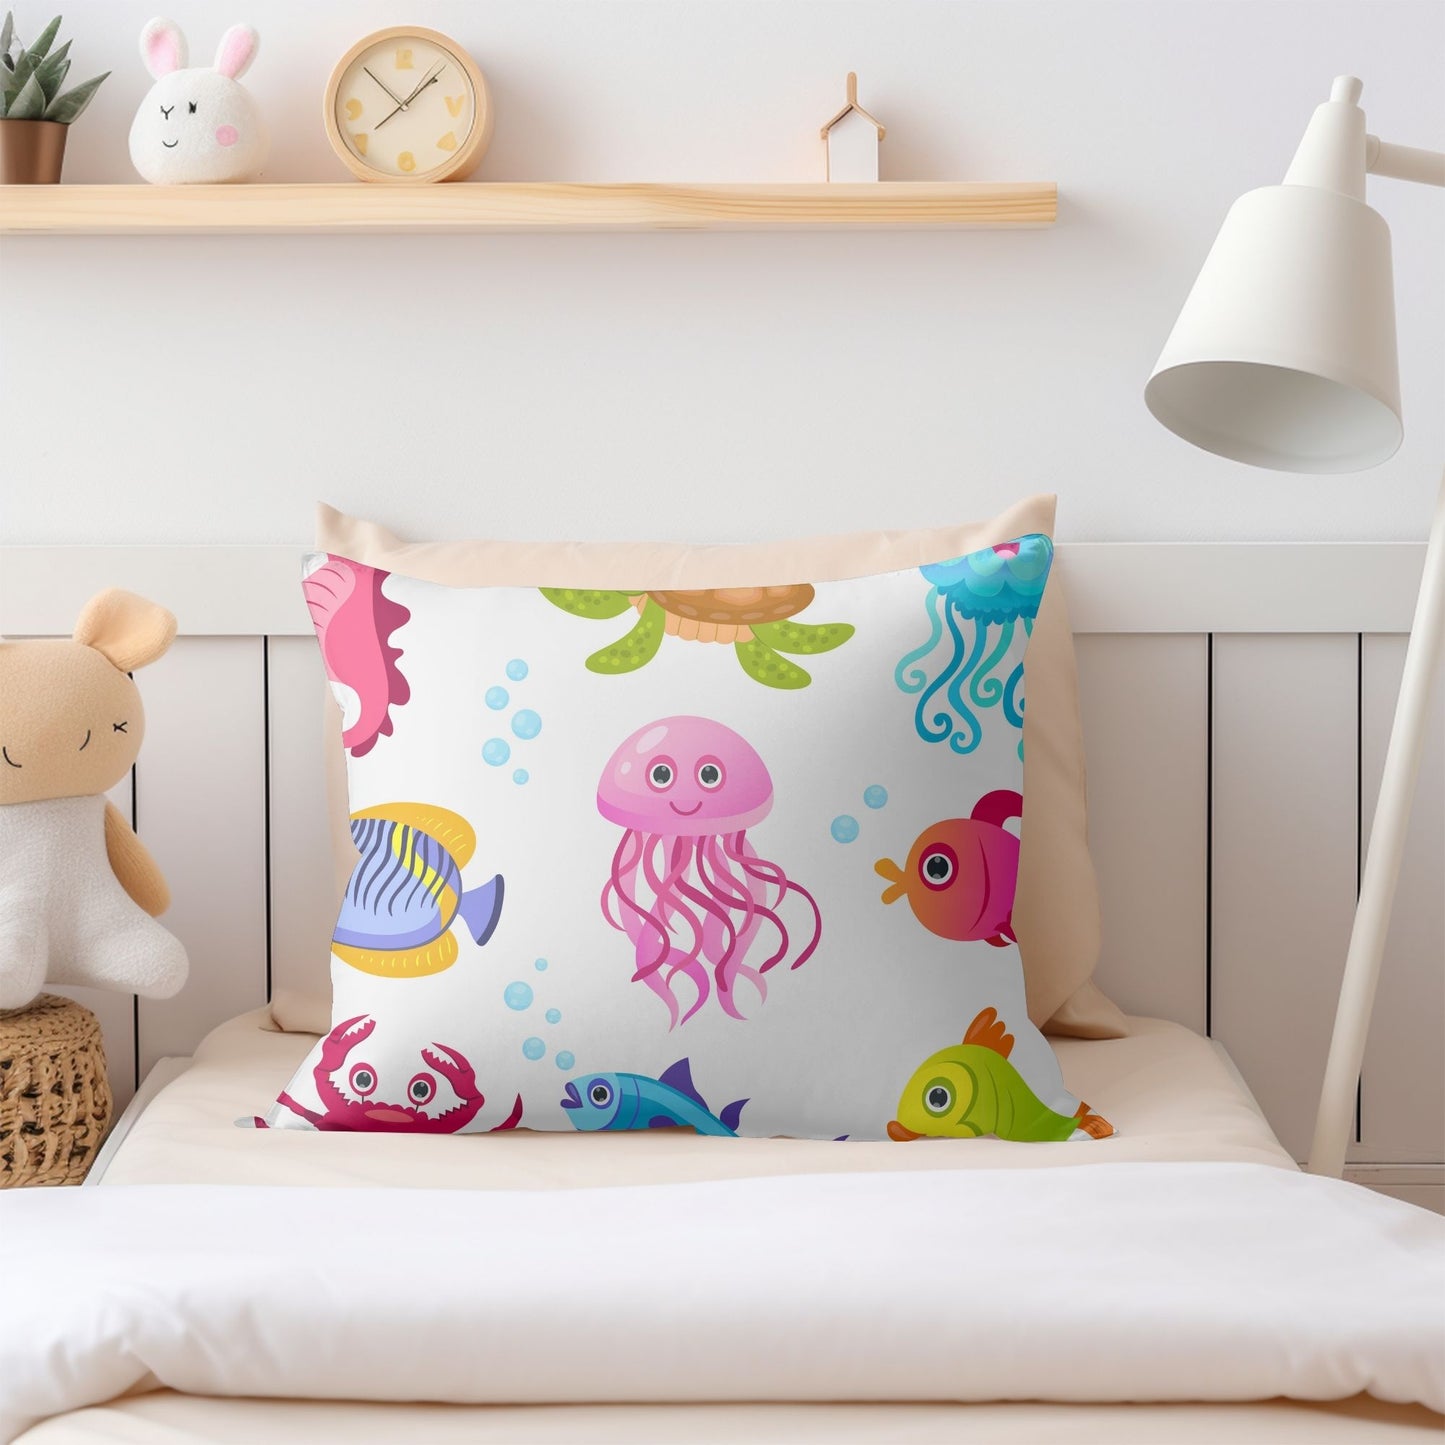 Charming kids pillow with a variety of sea creatures.